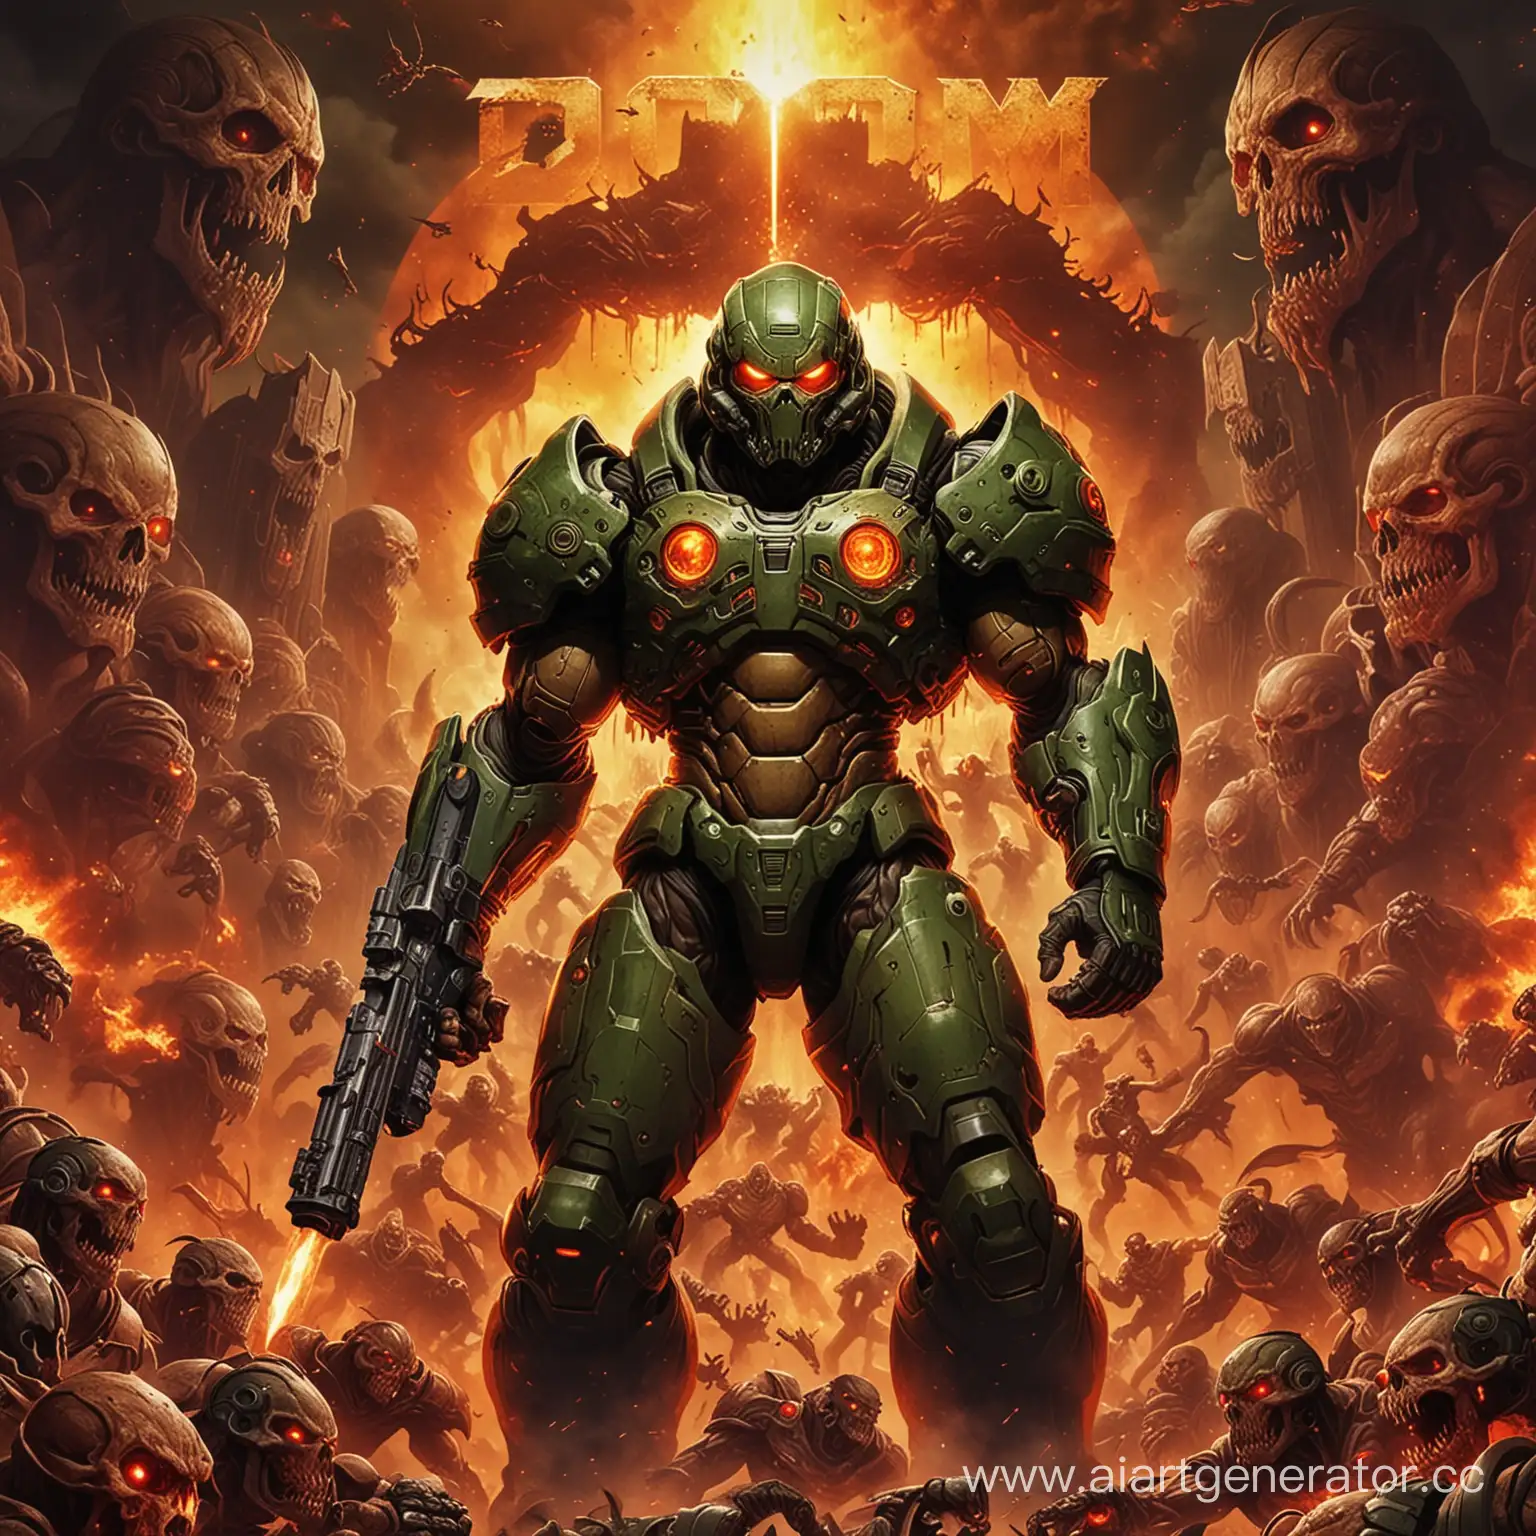 Futuristic-Anime-Characters-Confronting-Apocalyptic-Doom